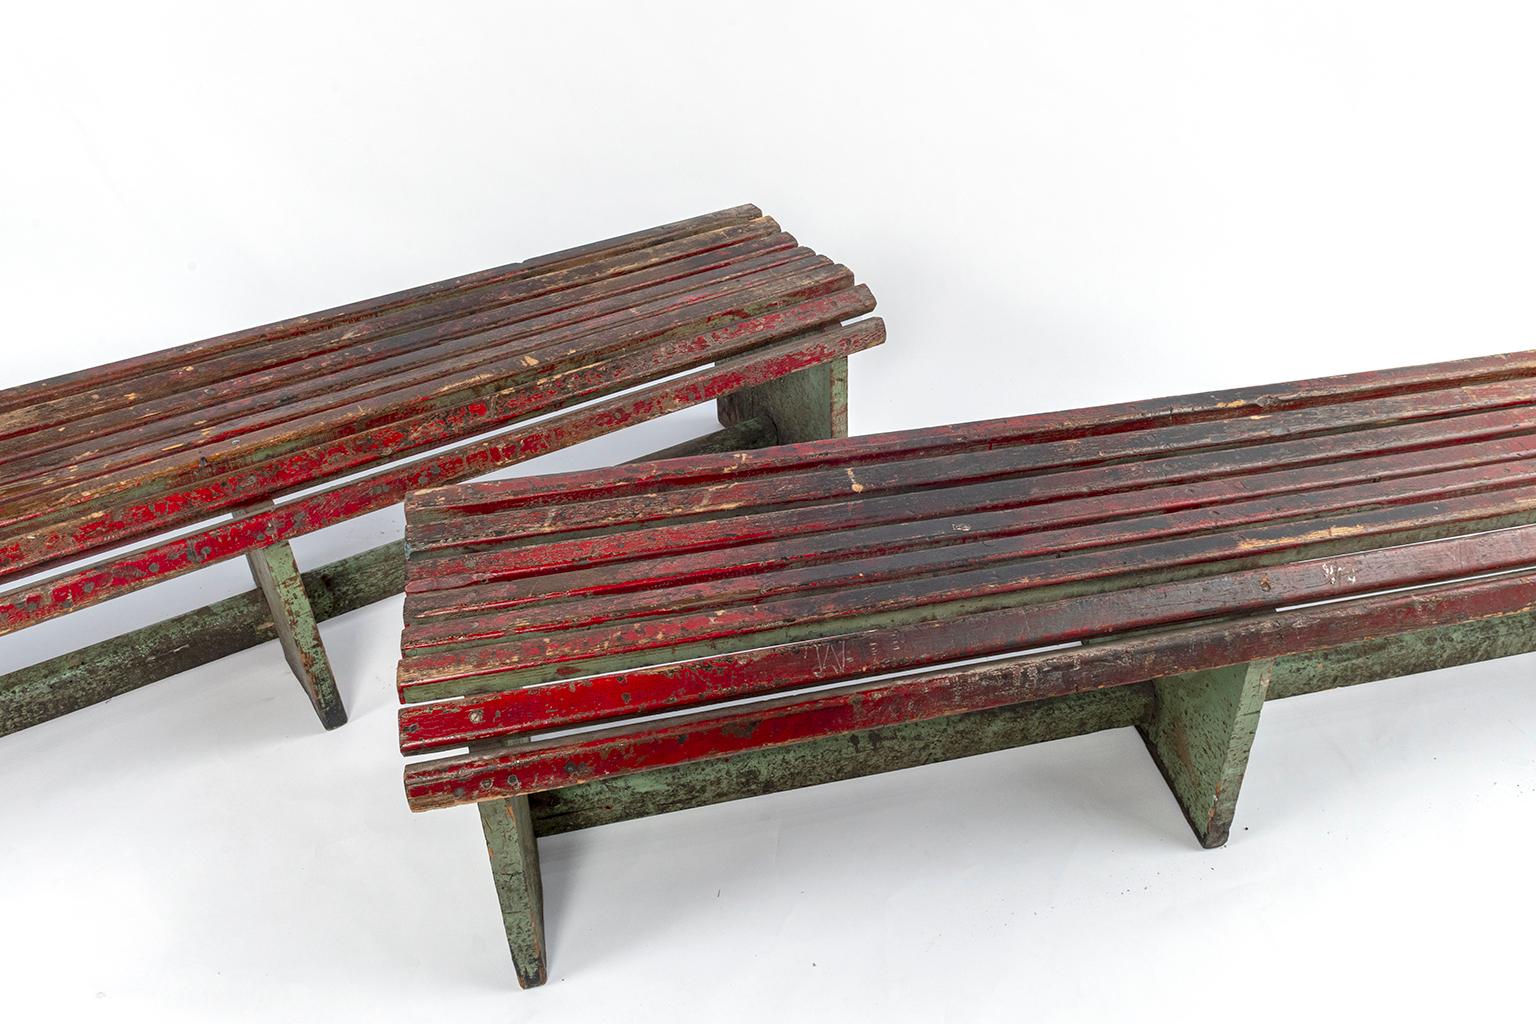 A pair of Slatted painted long benches sold individually.